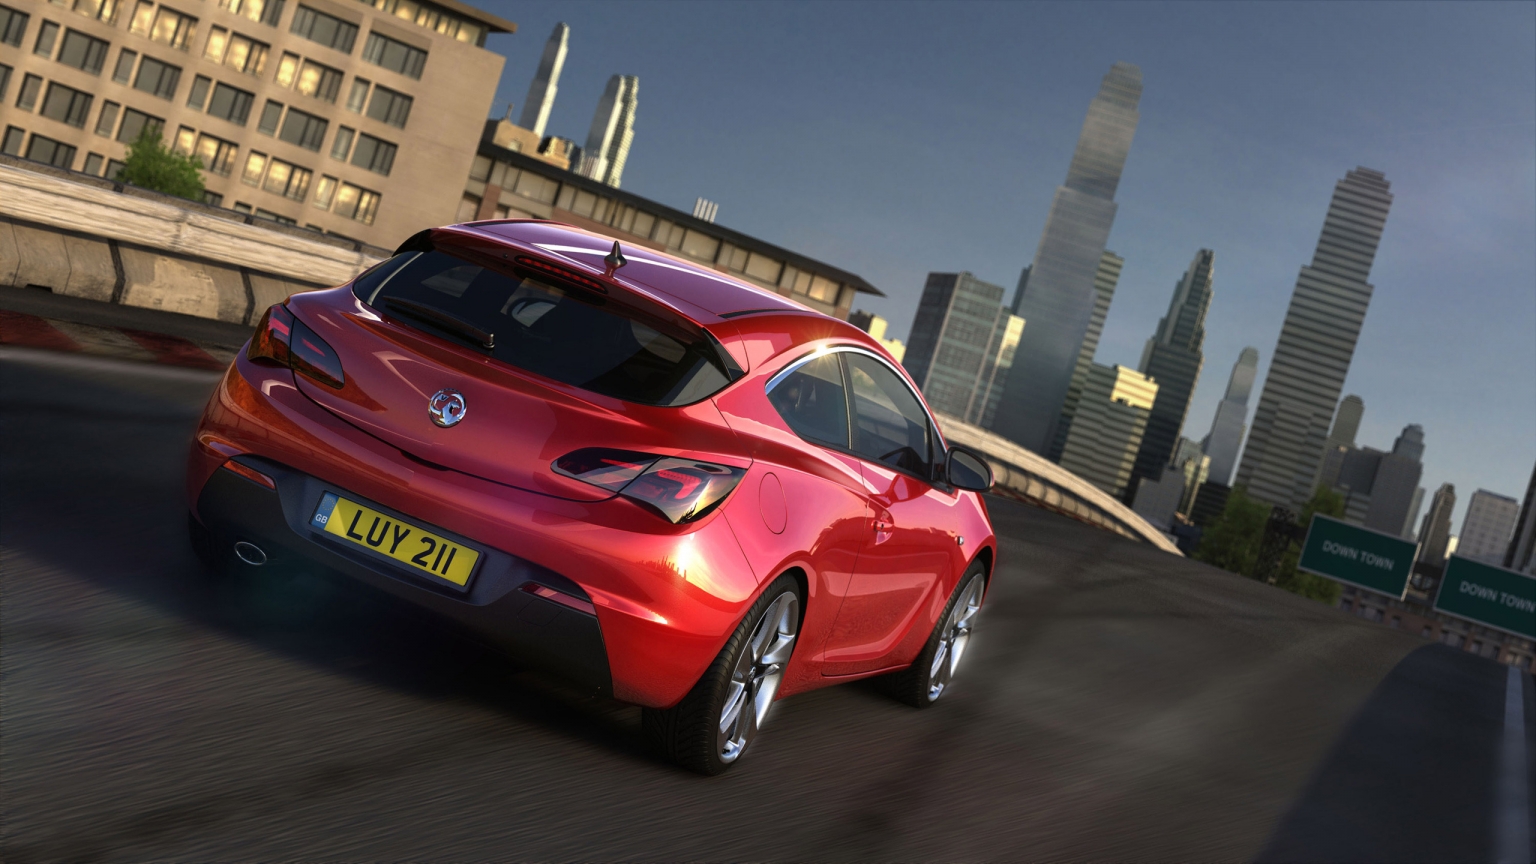 2012 Vauxhall Astra GTC Speed for 1536 x 864 HDTV resolution